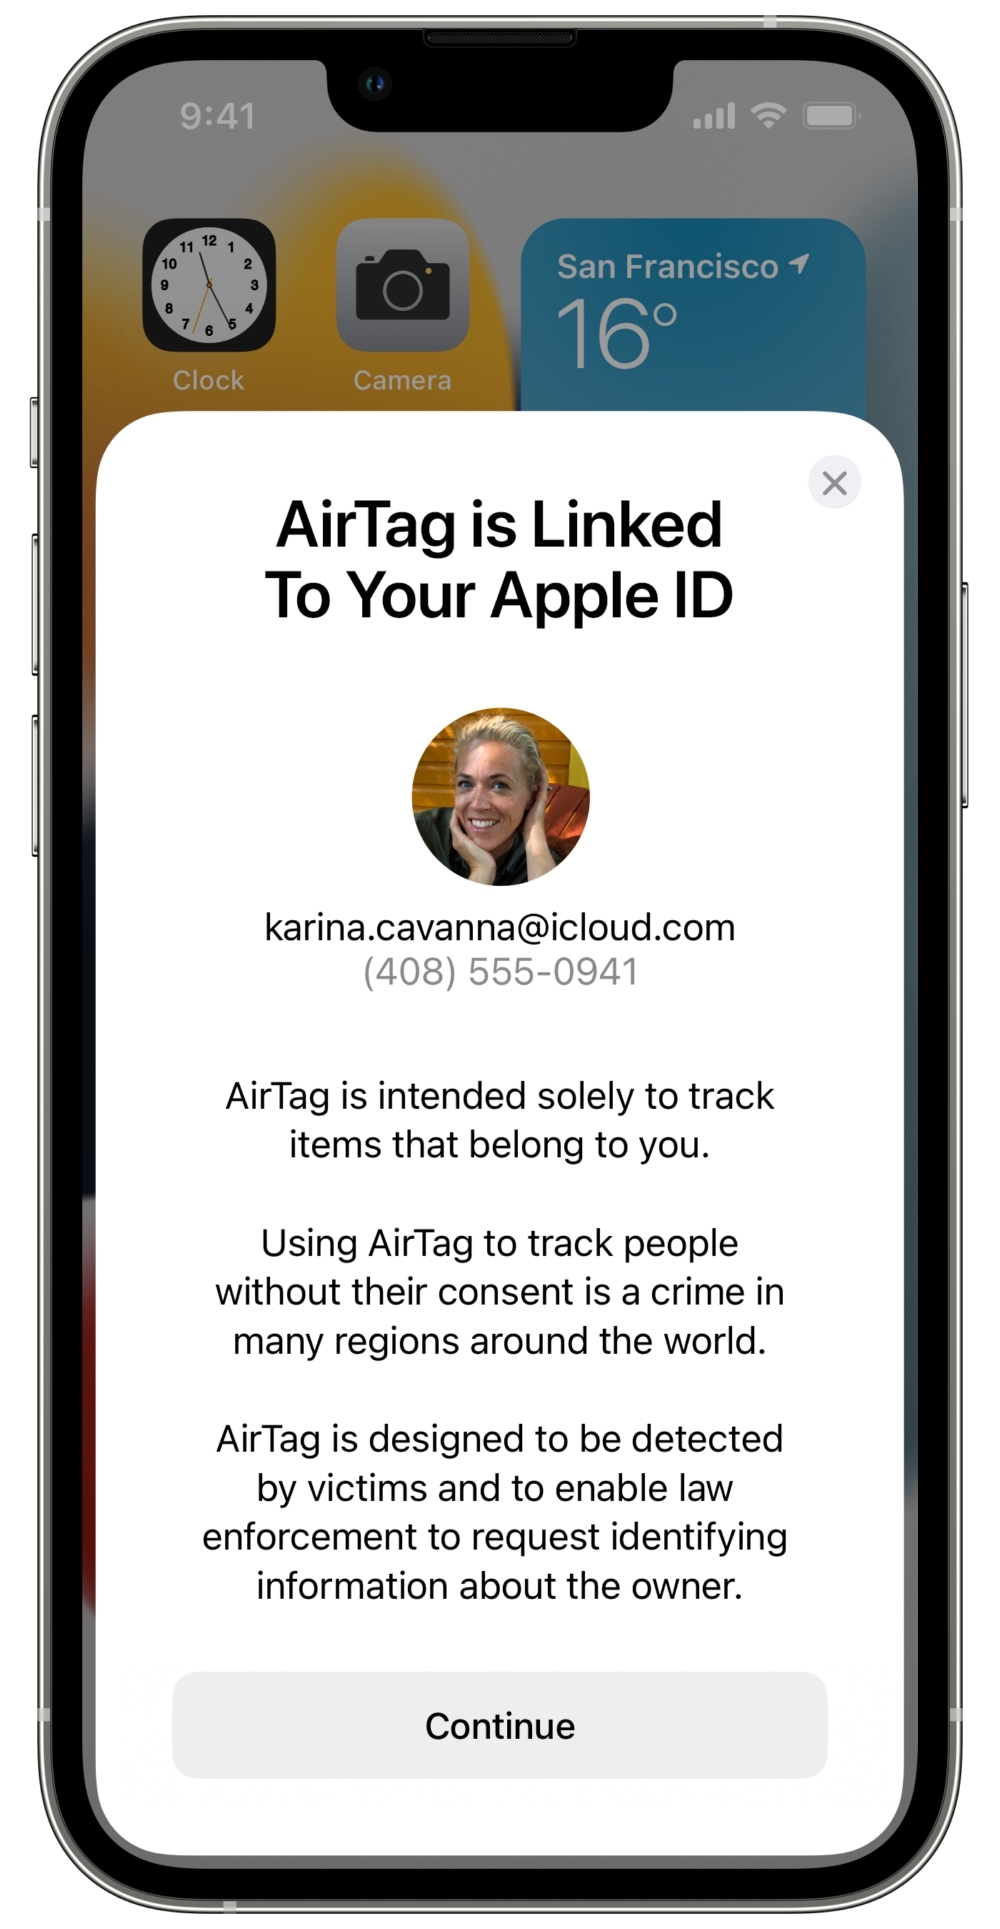 Apple's new warning to AirTag owners.